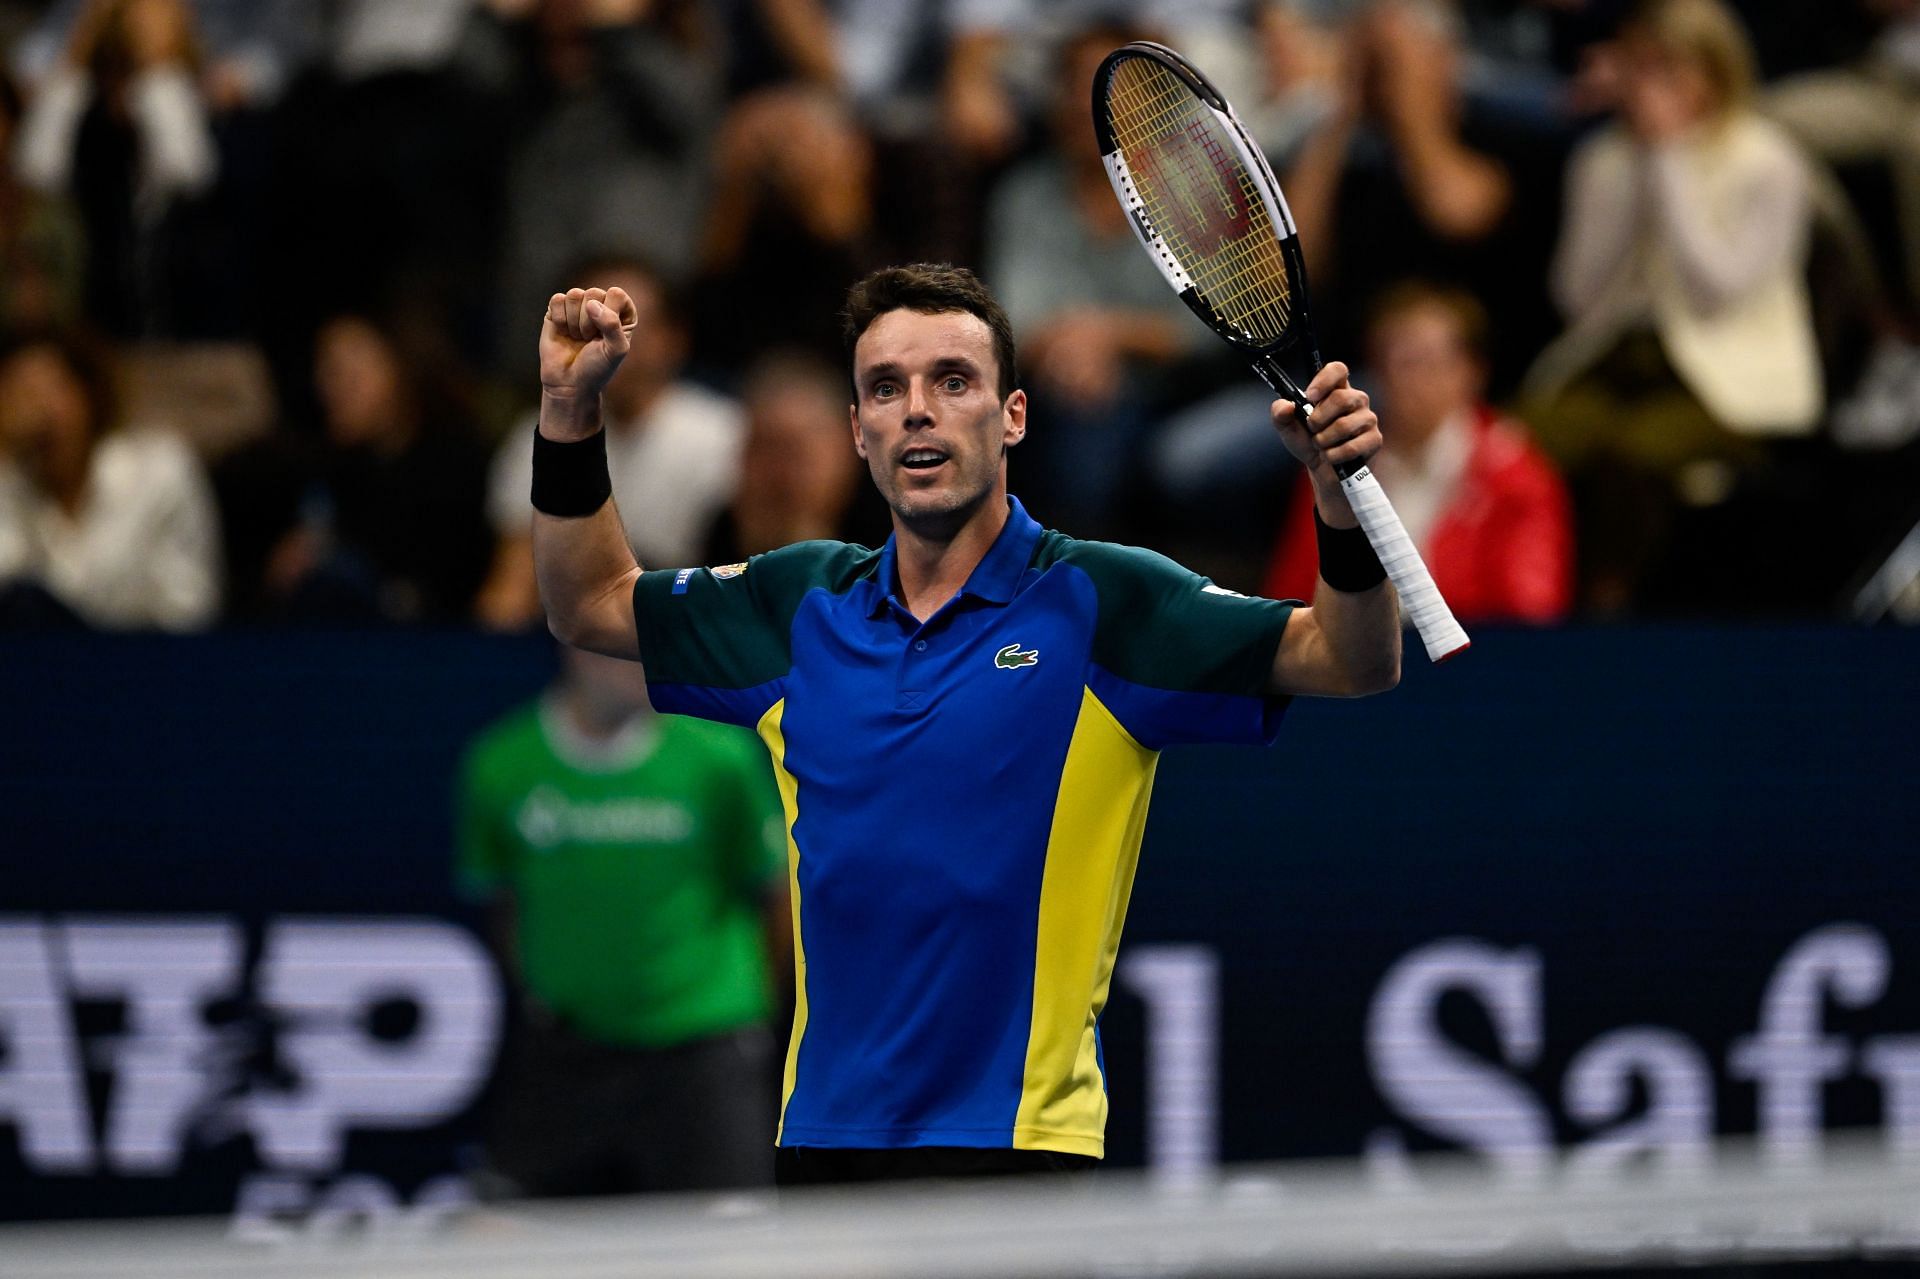 Roberto Bautista Agut is the top seed at the 2023 Swiss Open.